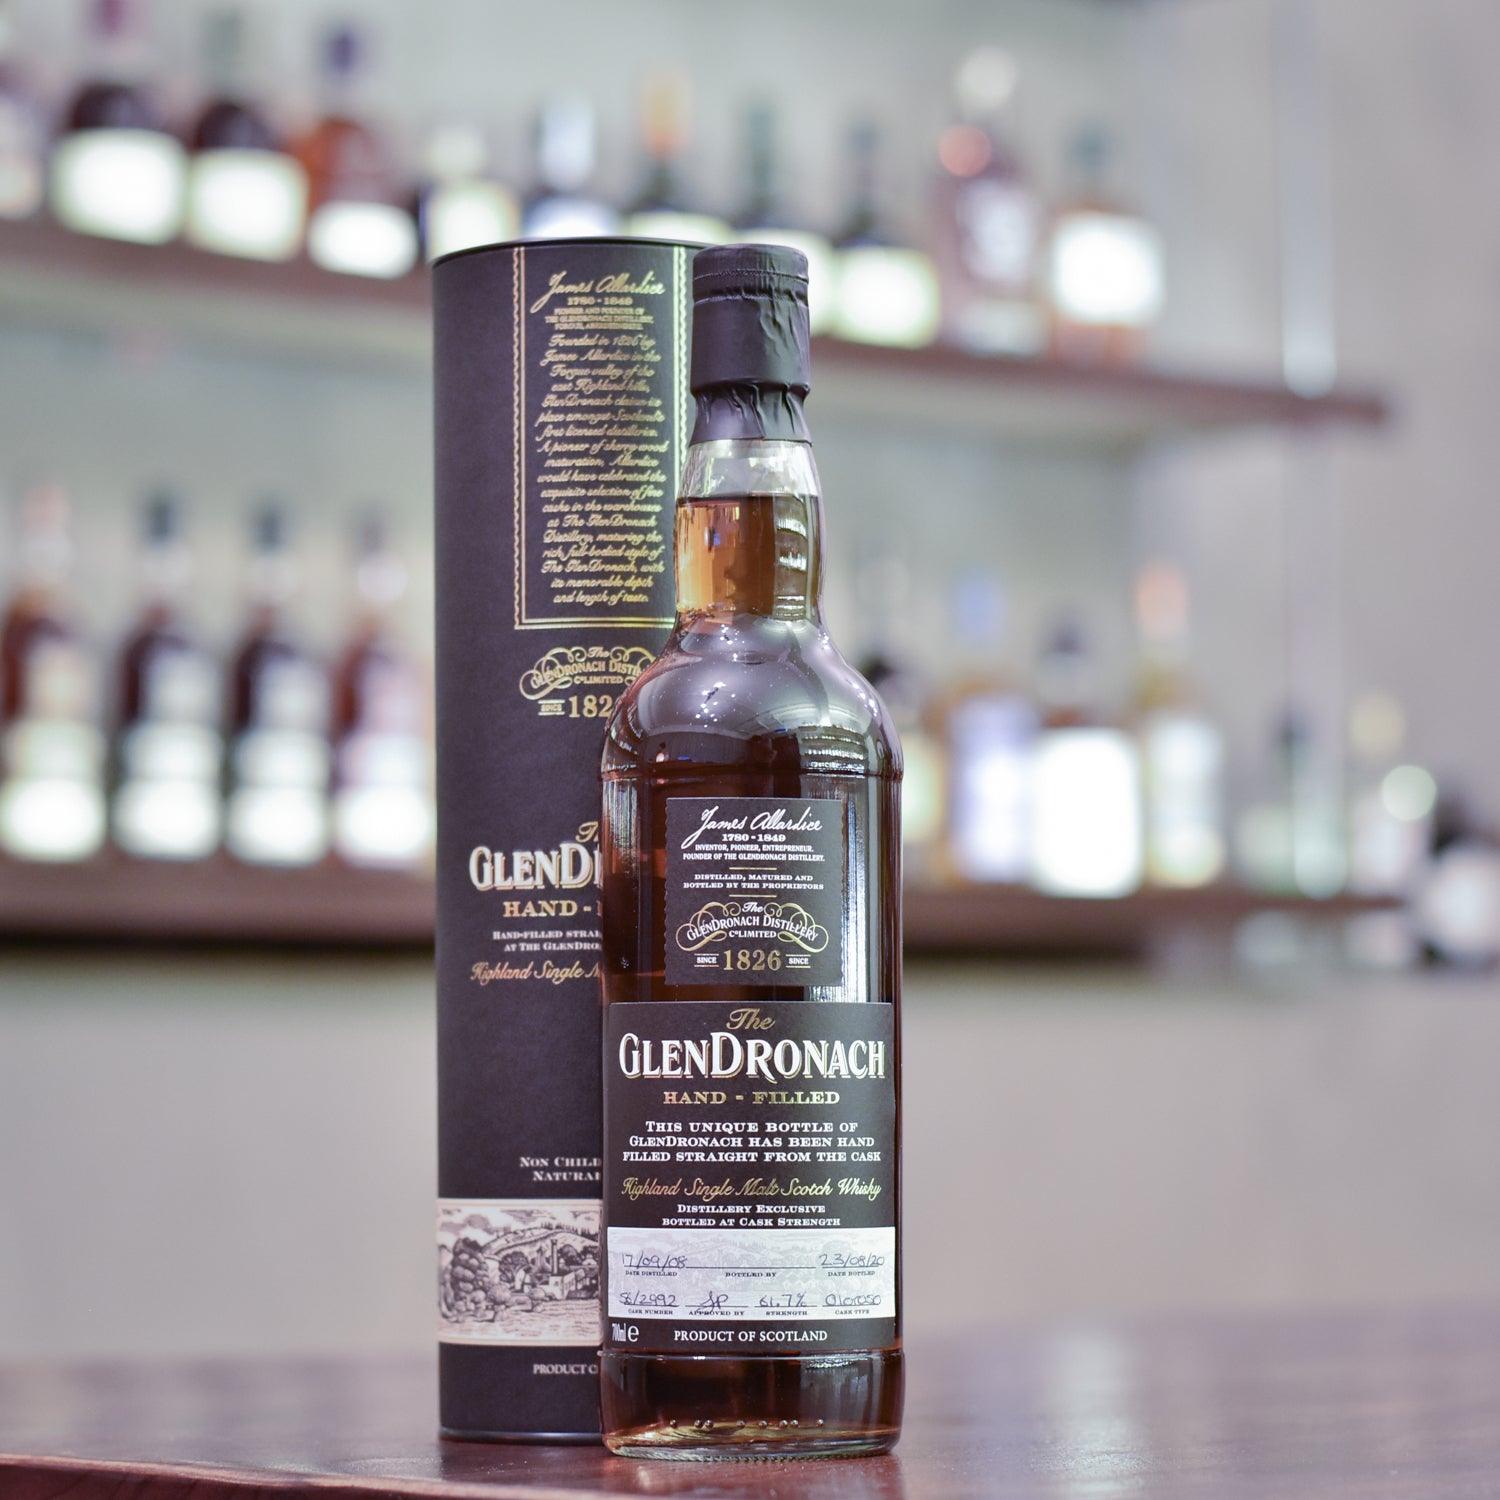 Glendronach 12 Year Old 2008 Hand-filled Cask 2992 - The Rare Malt